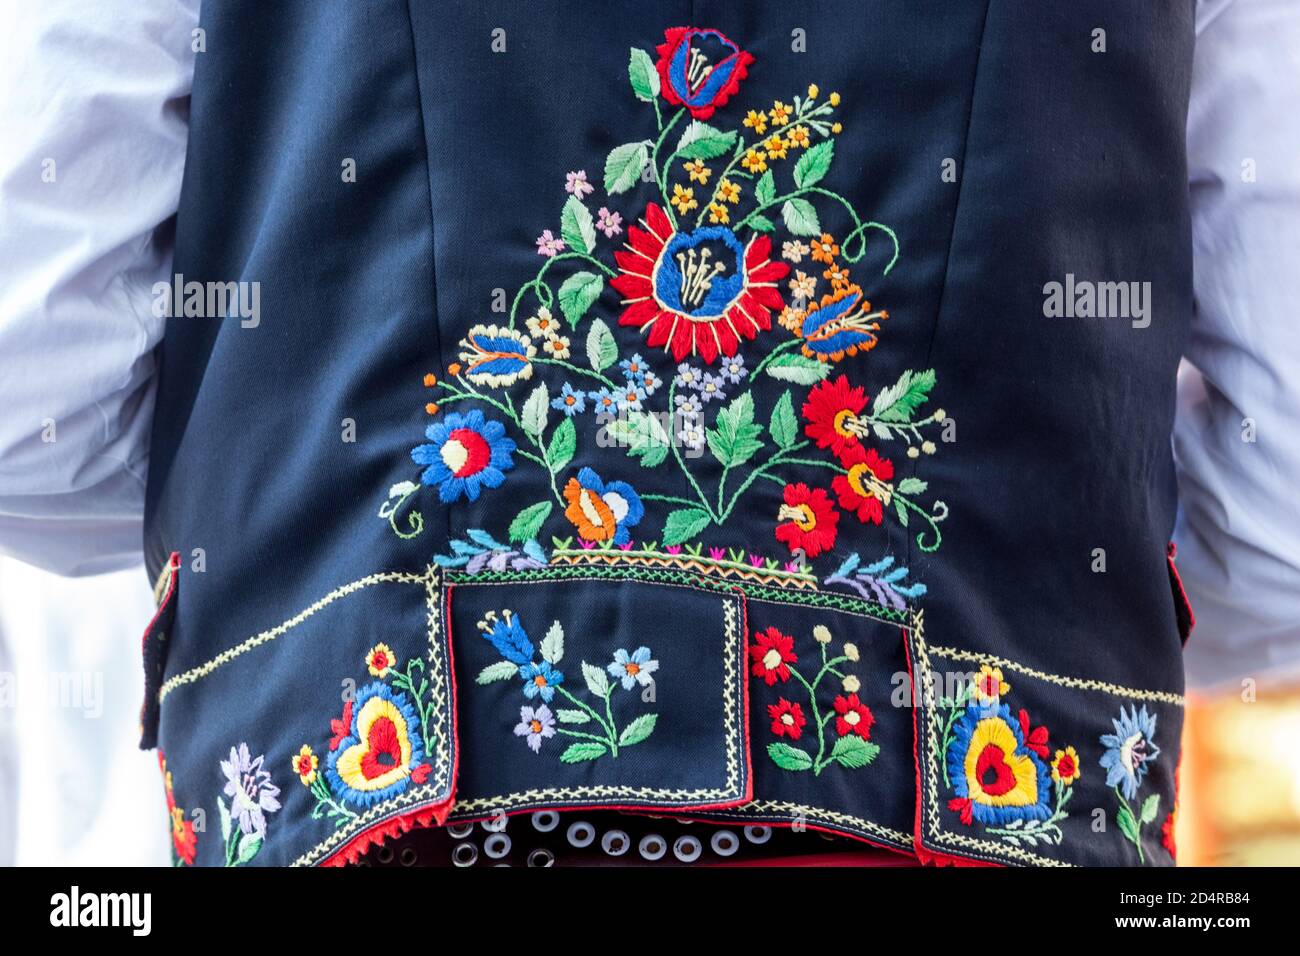 https://c8.alamy.com/comp/2D4RB84/traditional-dress-pattern-folk-czech-embroidery-on-folklore-costume-from-south-moravia-czech-republic-europe-2D4RB84.jpg